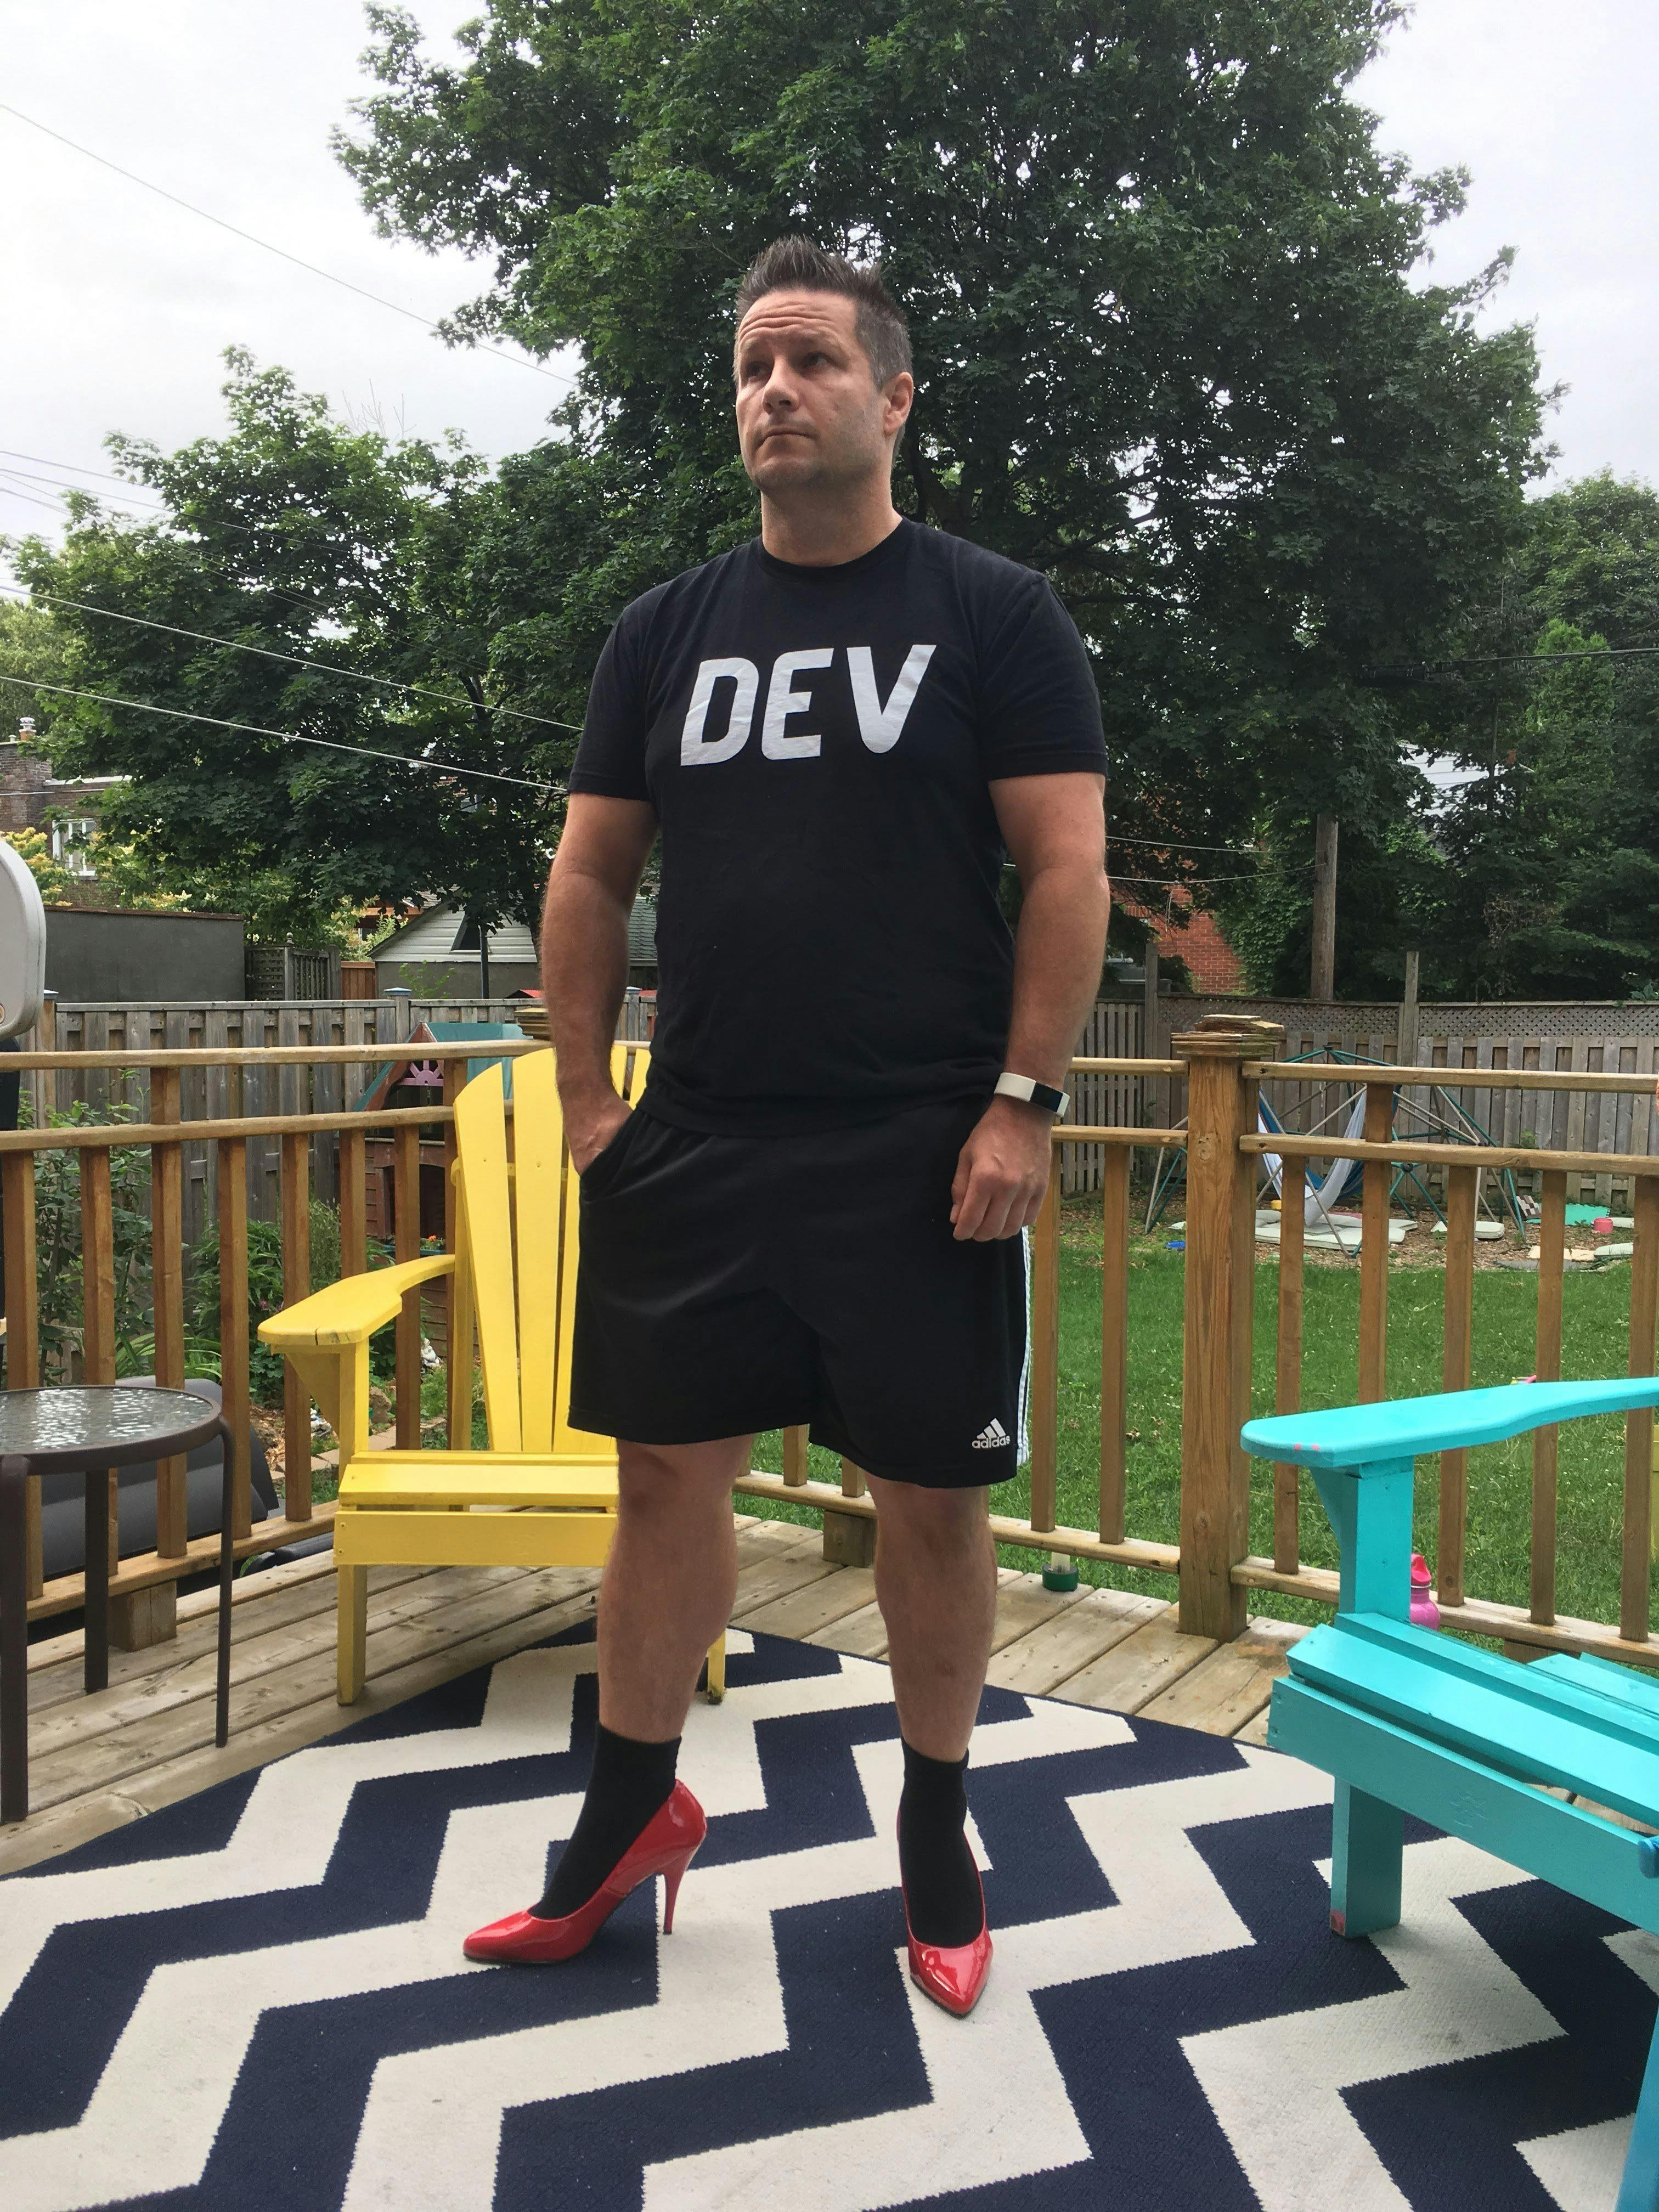 Me on my deck in high heel shoes after doing the Walk a Mile in Her Shoes fundraiser